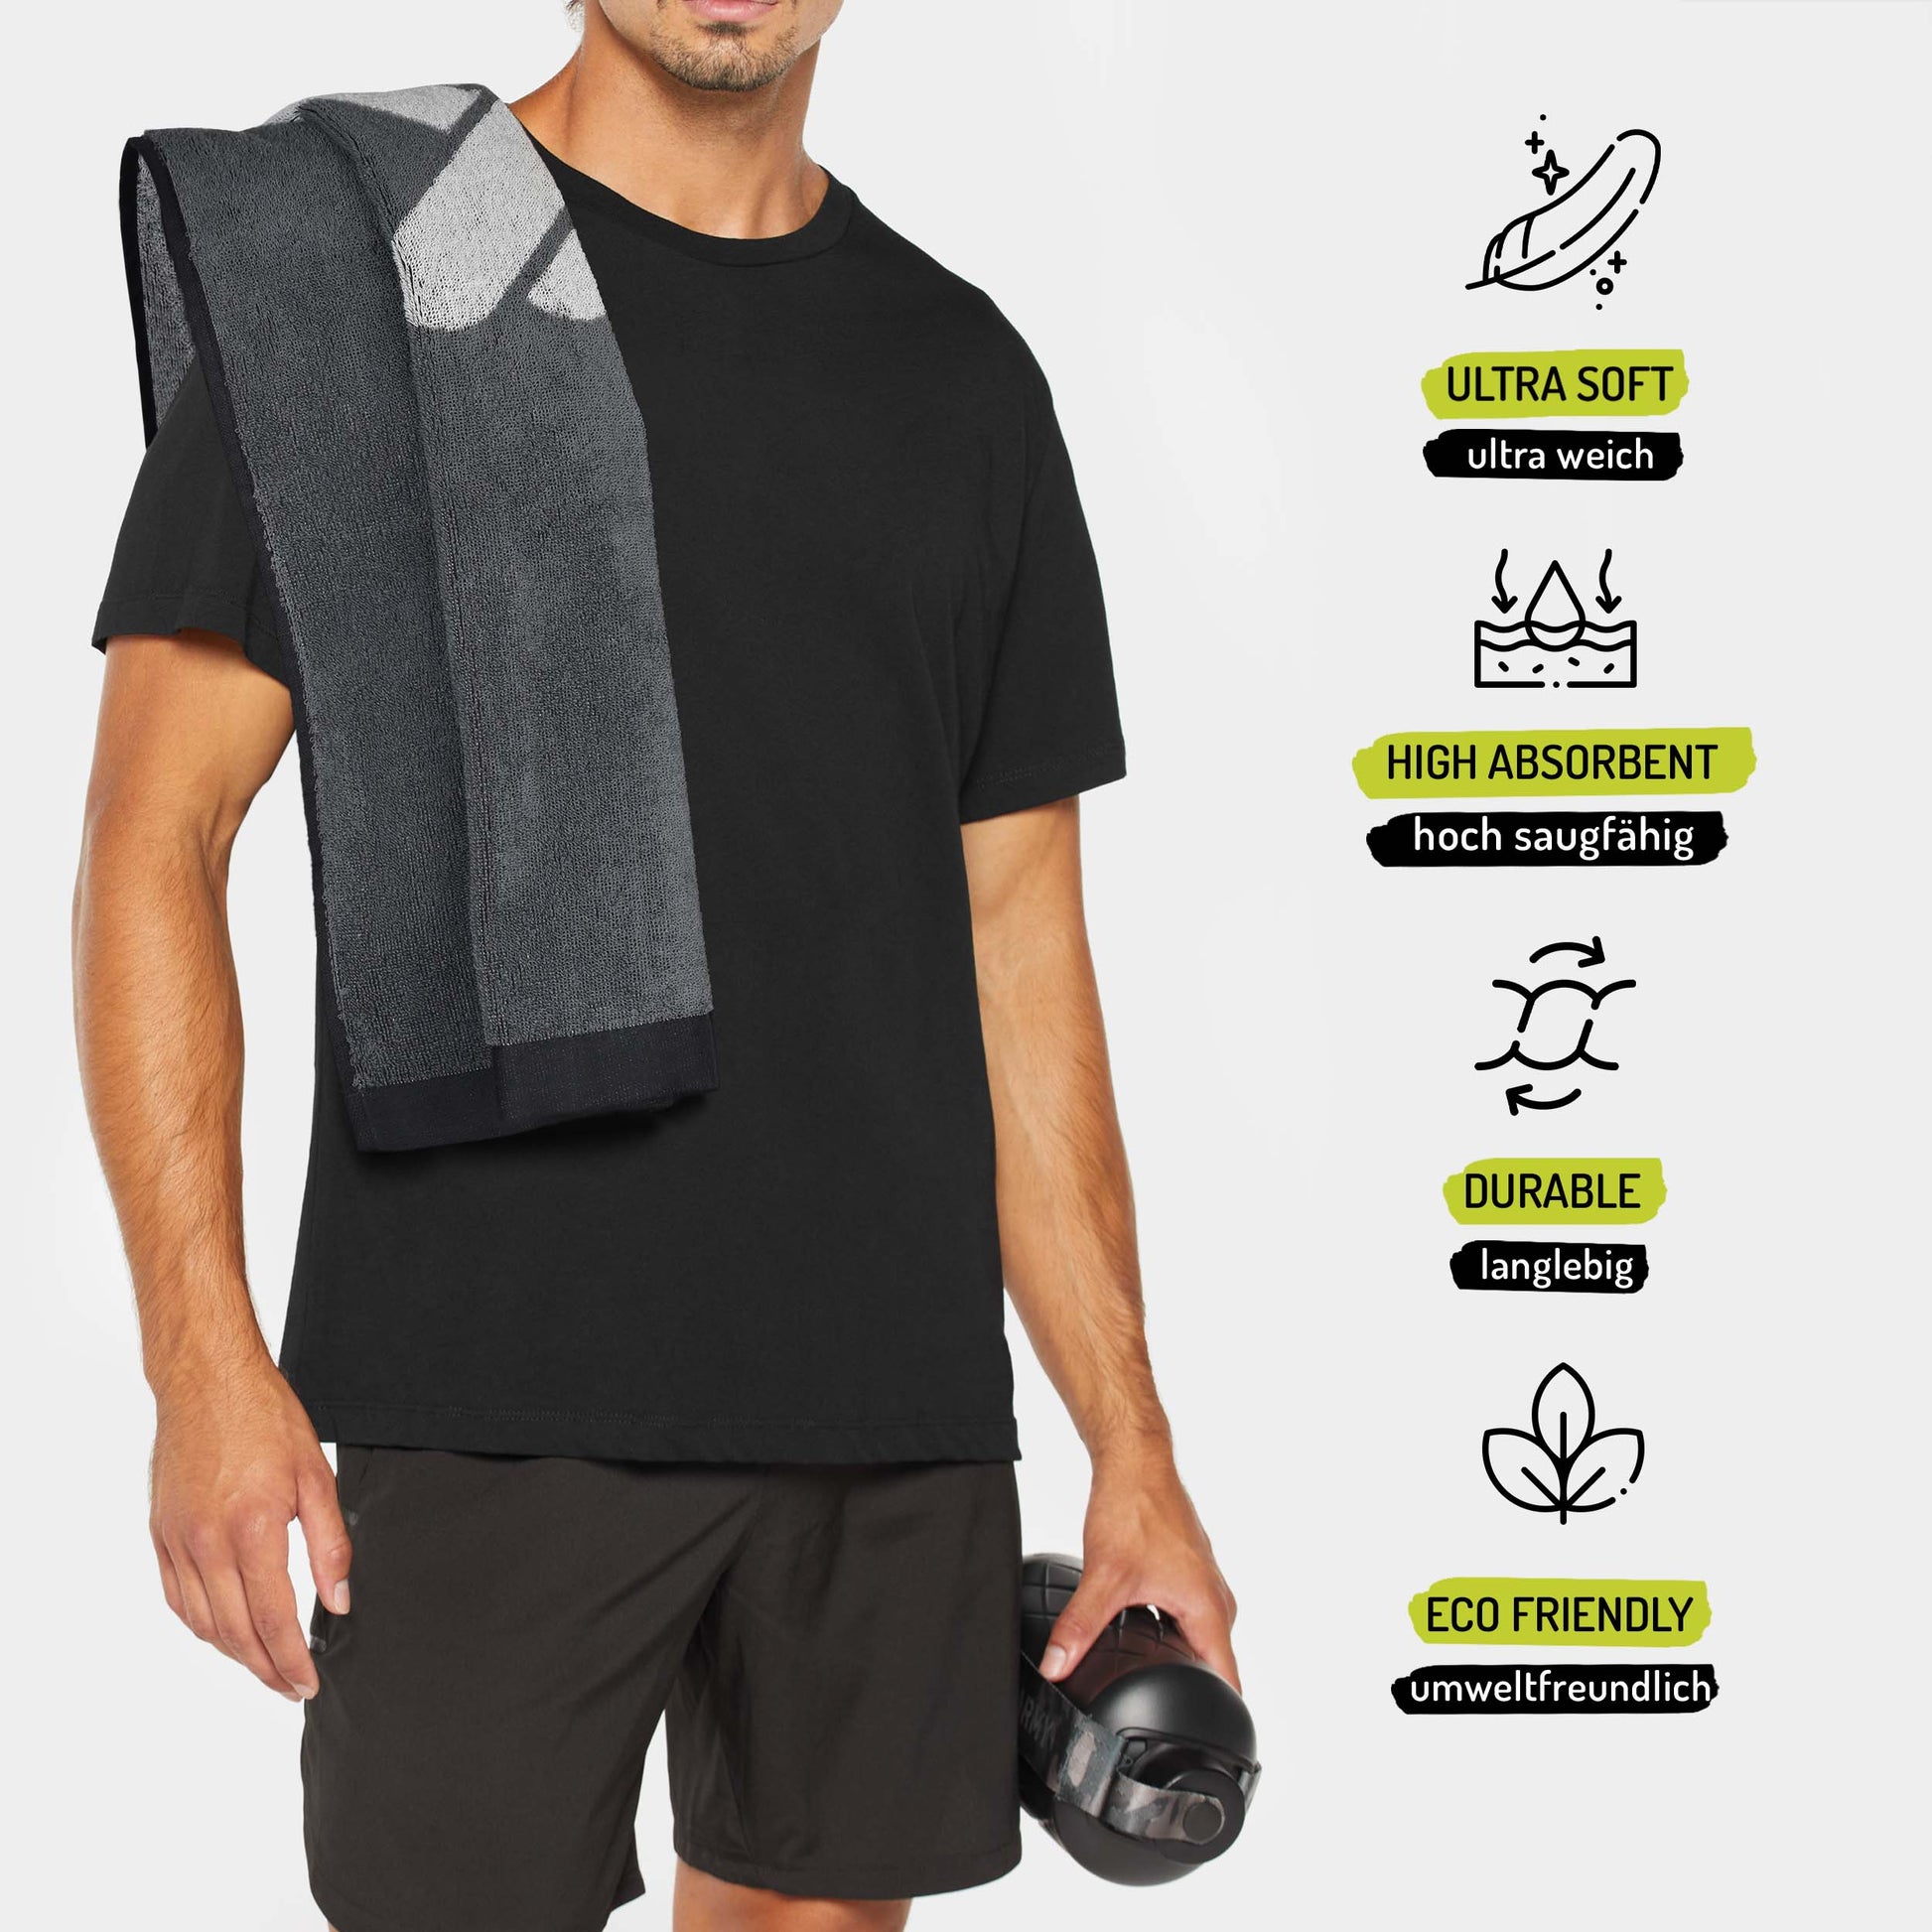 SILVER GREY FITNESS TOWEL FOR WORKOUT SPORTS-fitness towel-Weave Essentials-Weave Essentials